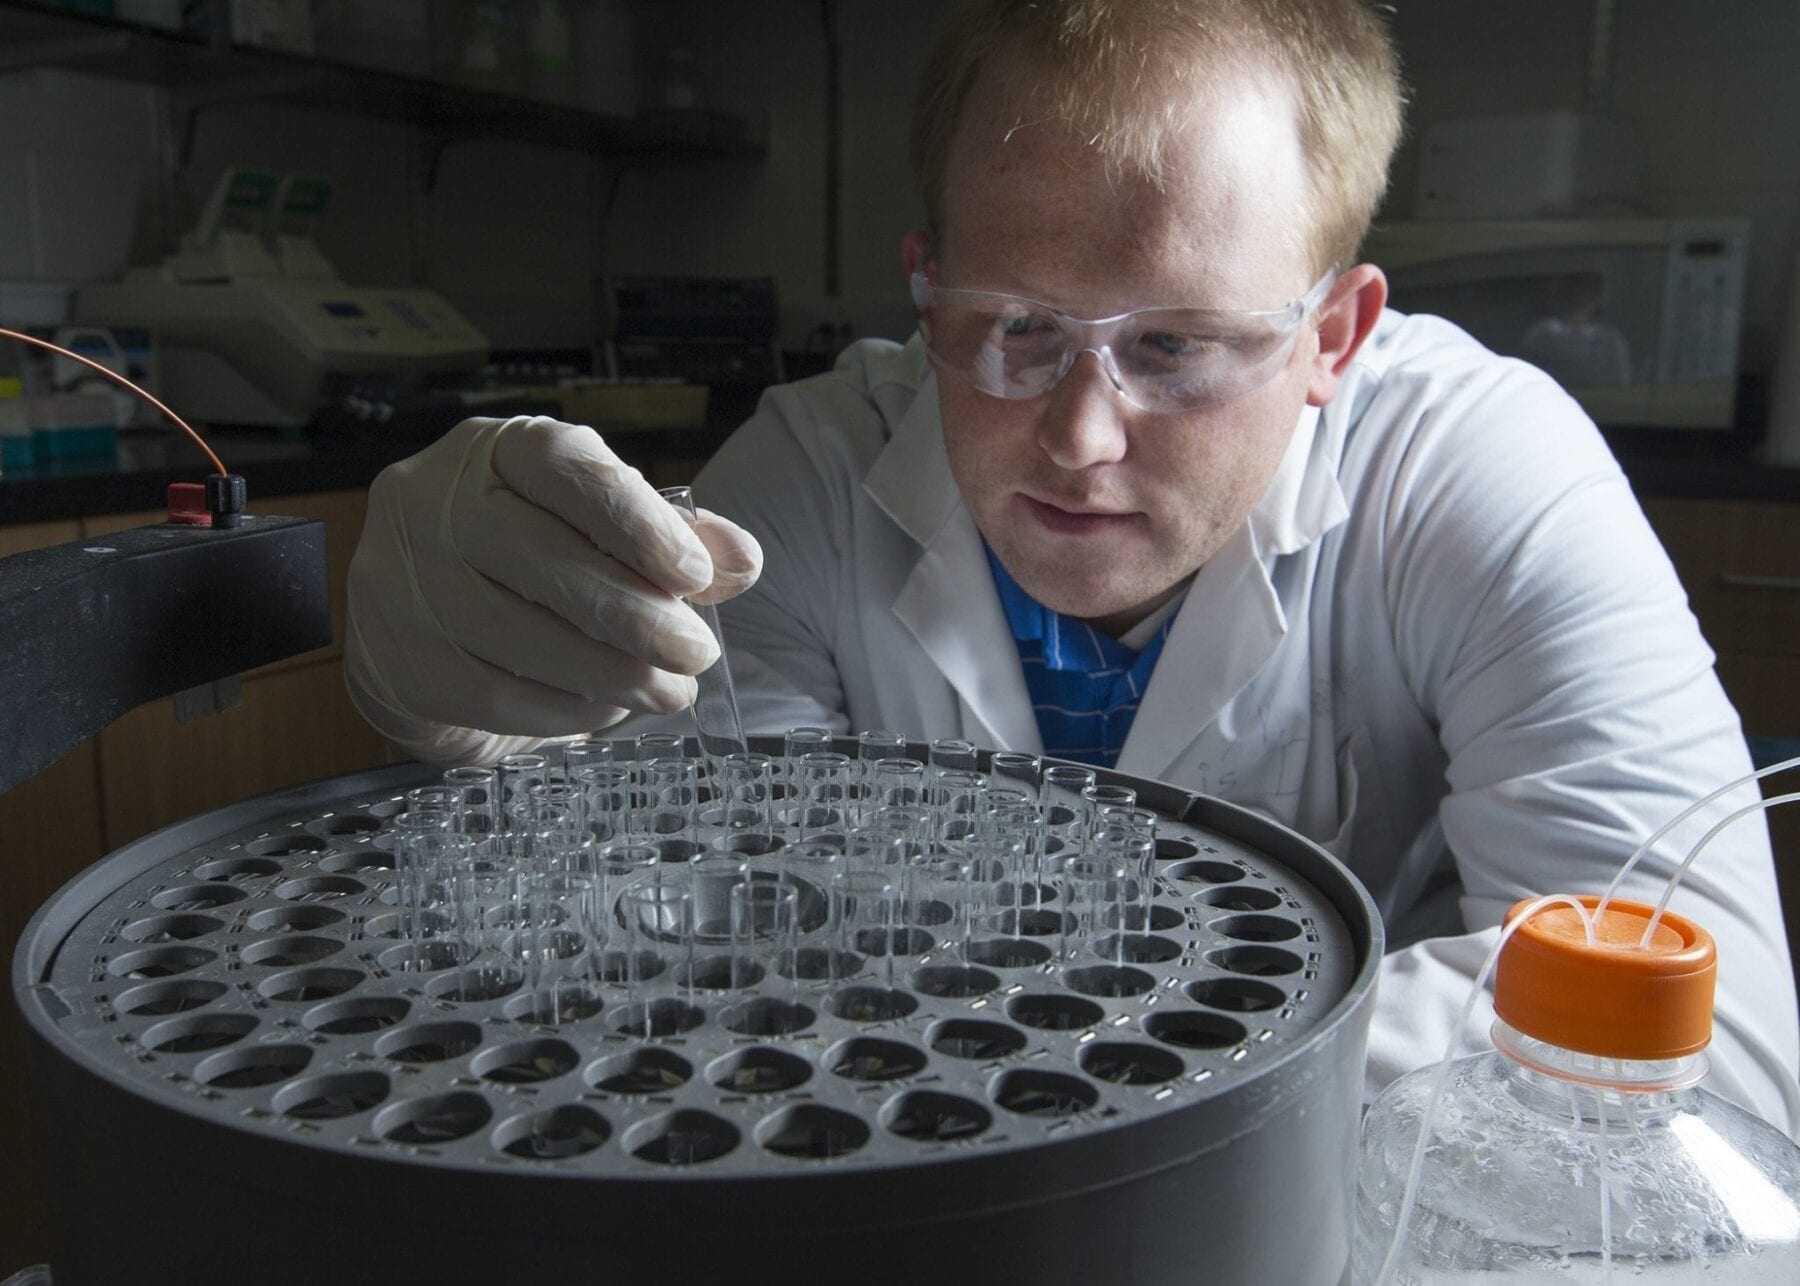 BYU researchers speeding up process of making vaccines